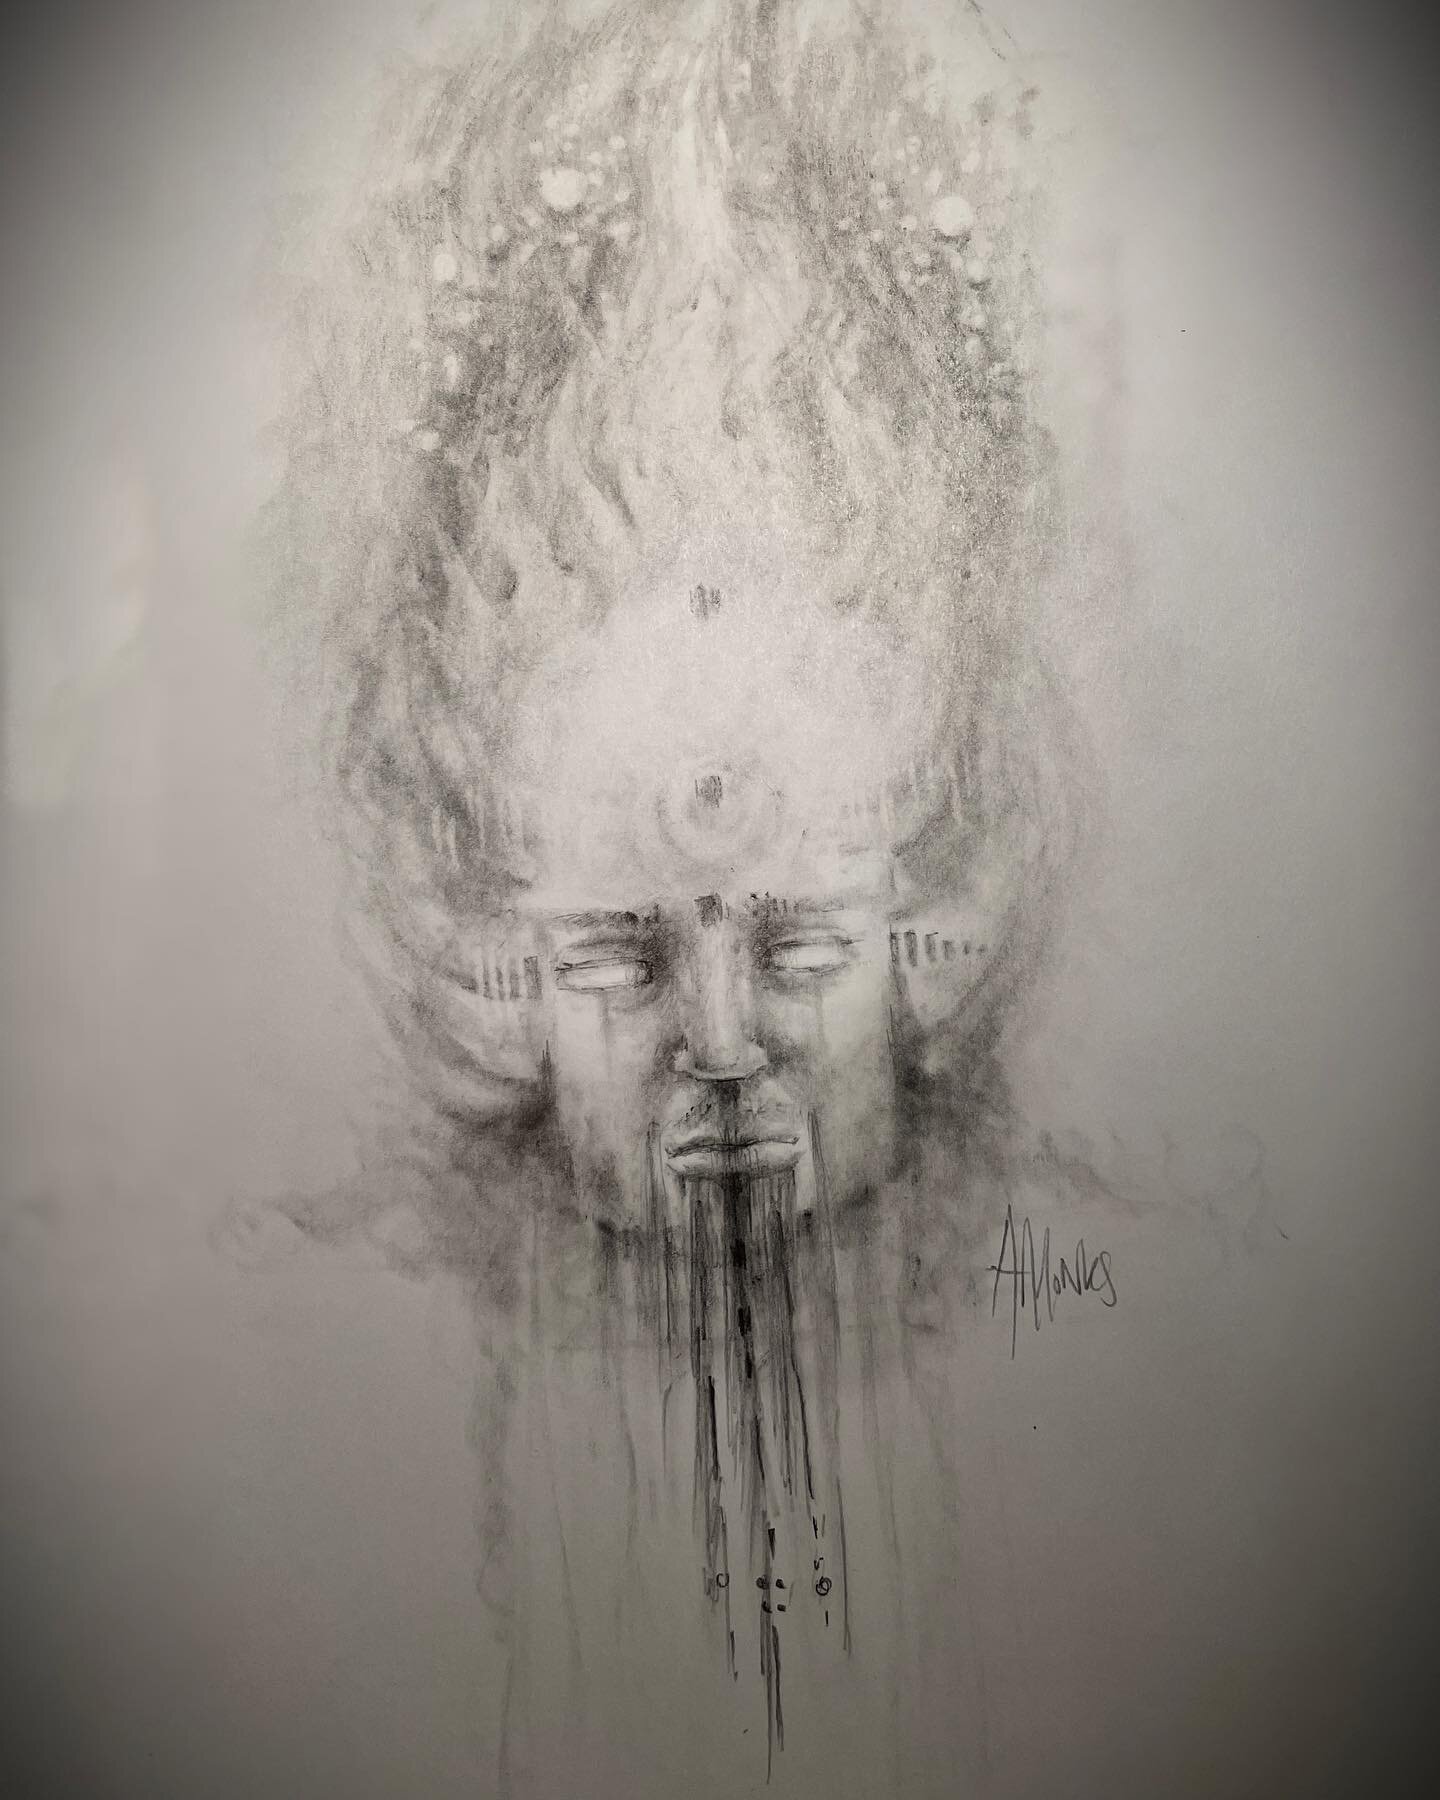 &lsquo;Postliminal&rsquo;
Something new is emerging for me to express in art. This is the beginning of it for me. 

#drawing #sketch #portrait #graphite #art #artist